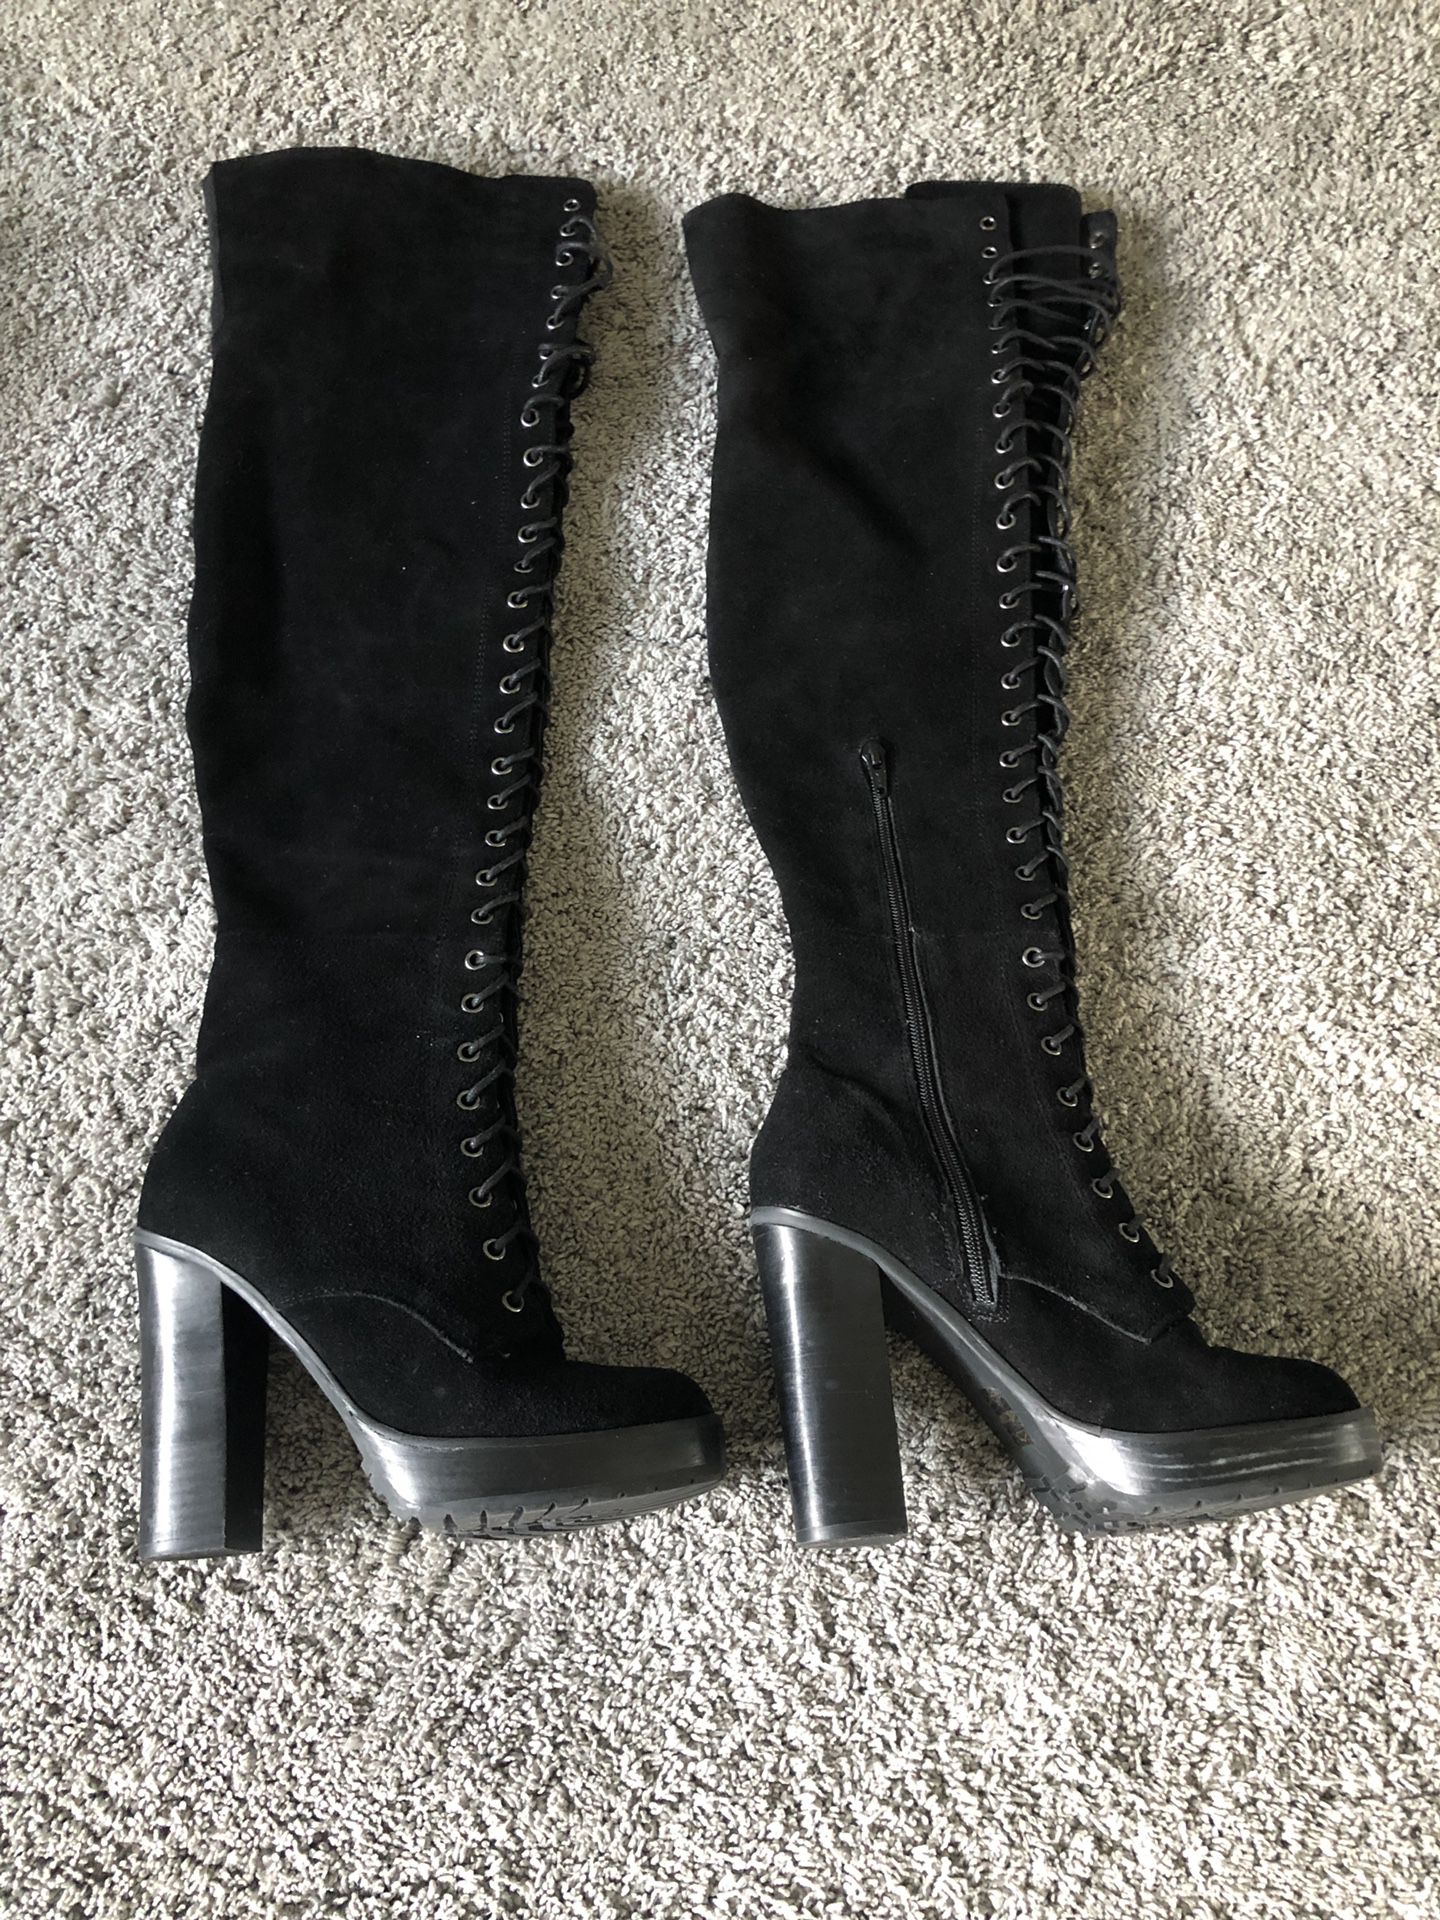 Sexy knee high boots- ALDO size 7.5